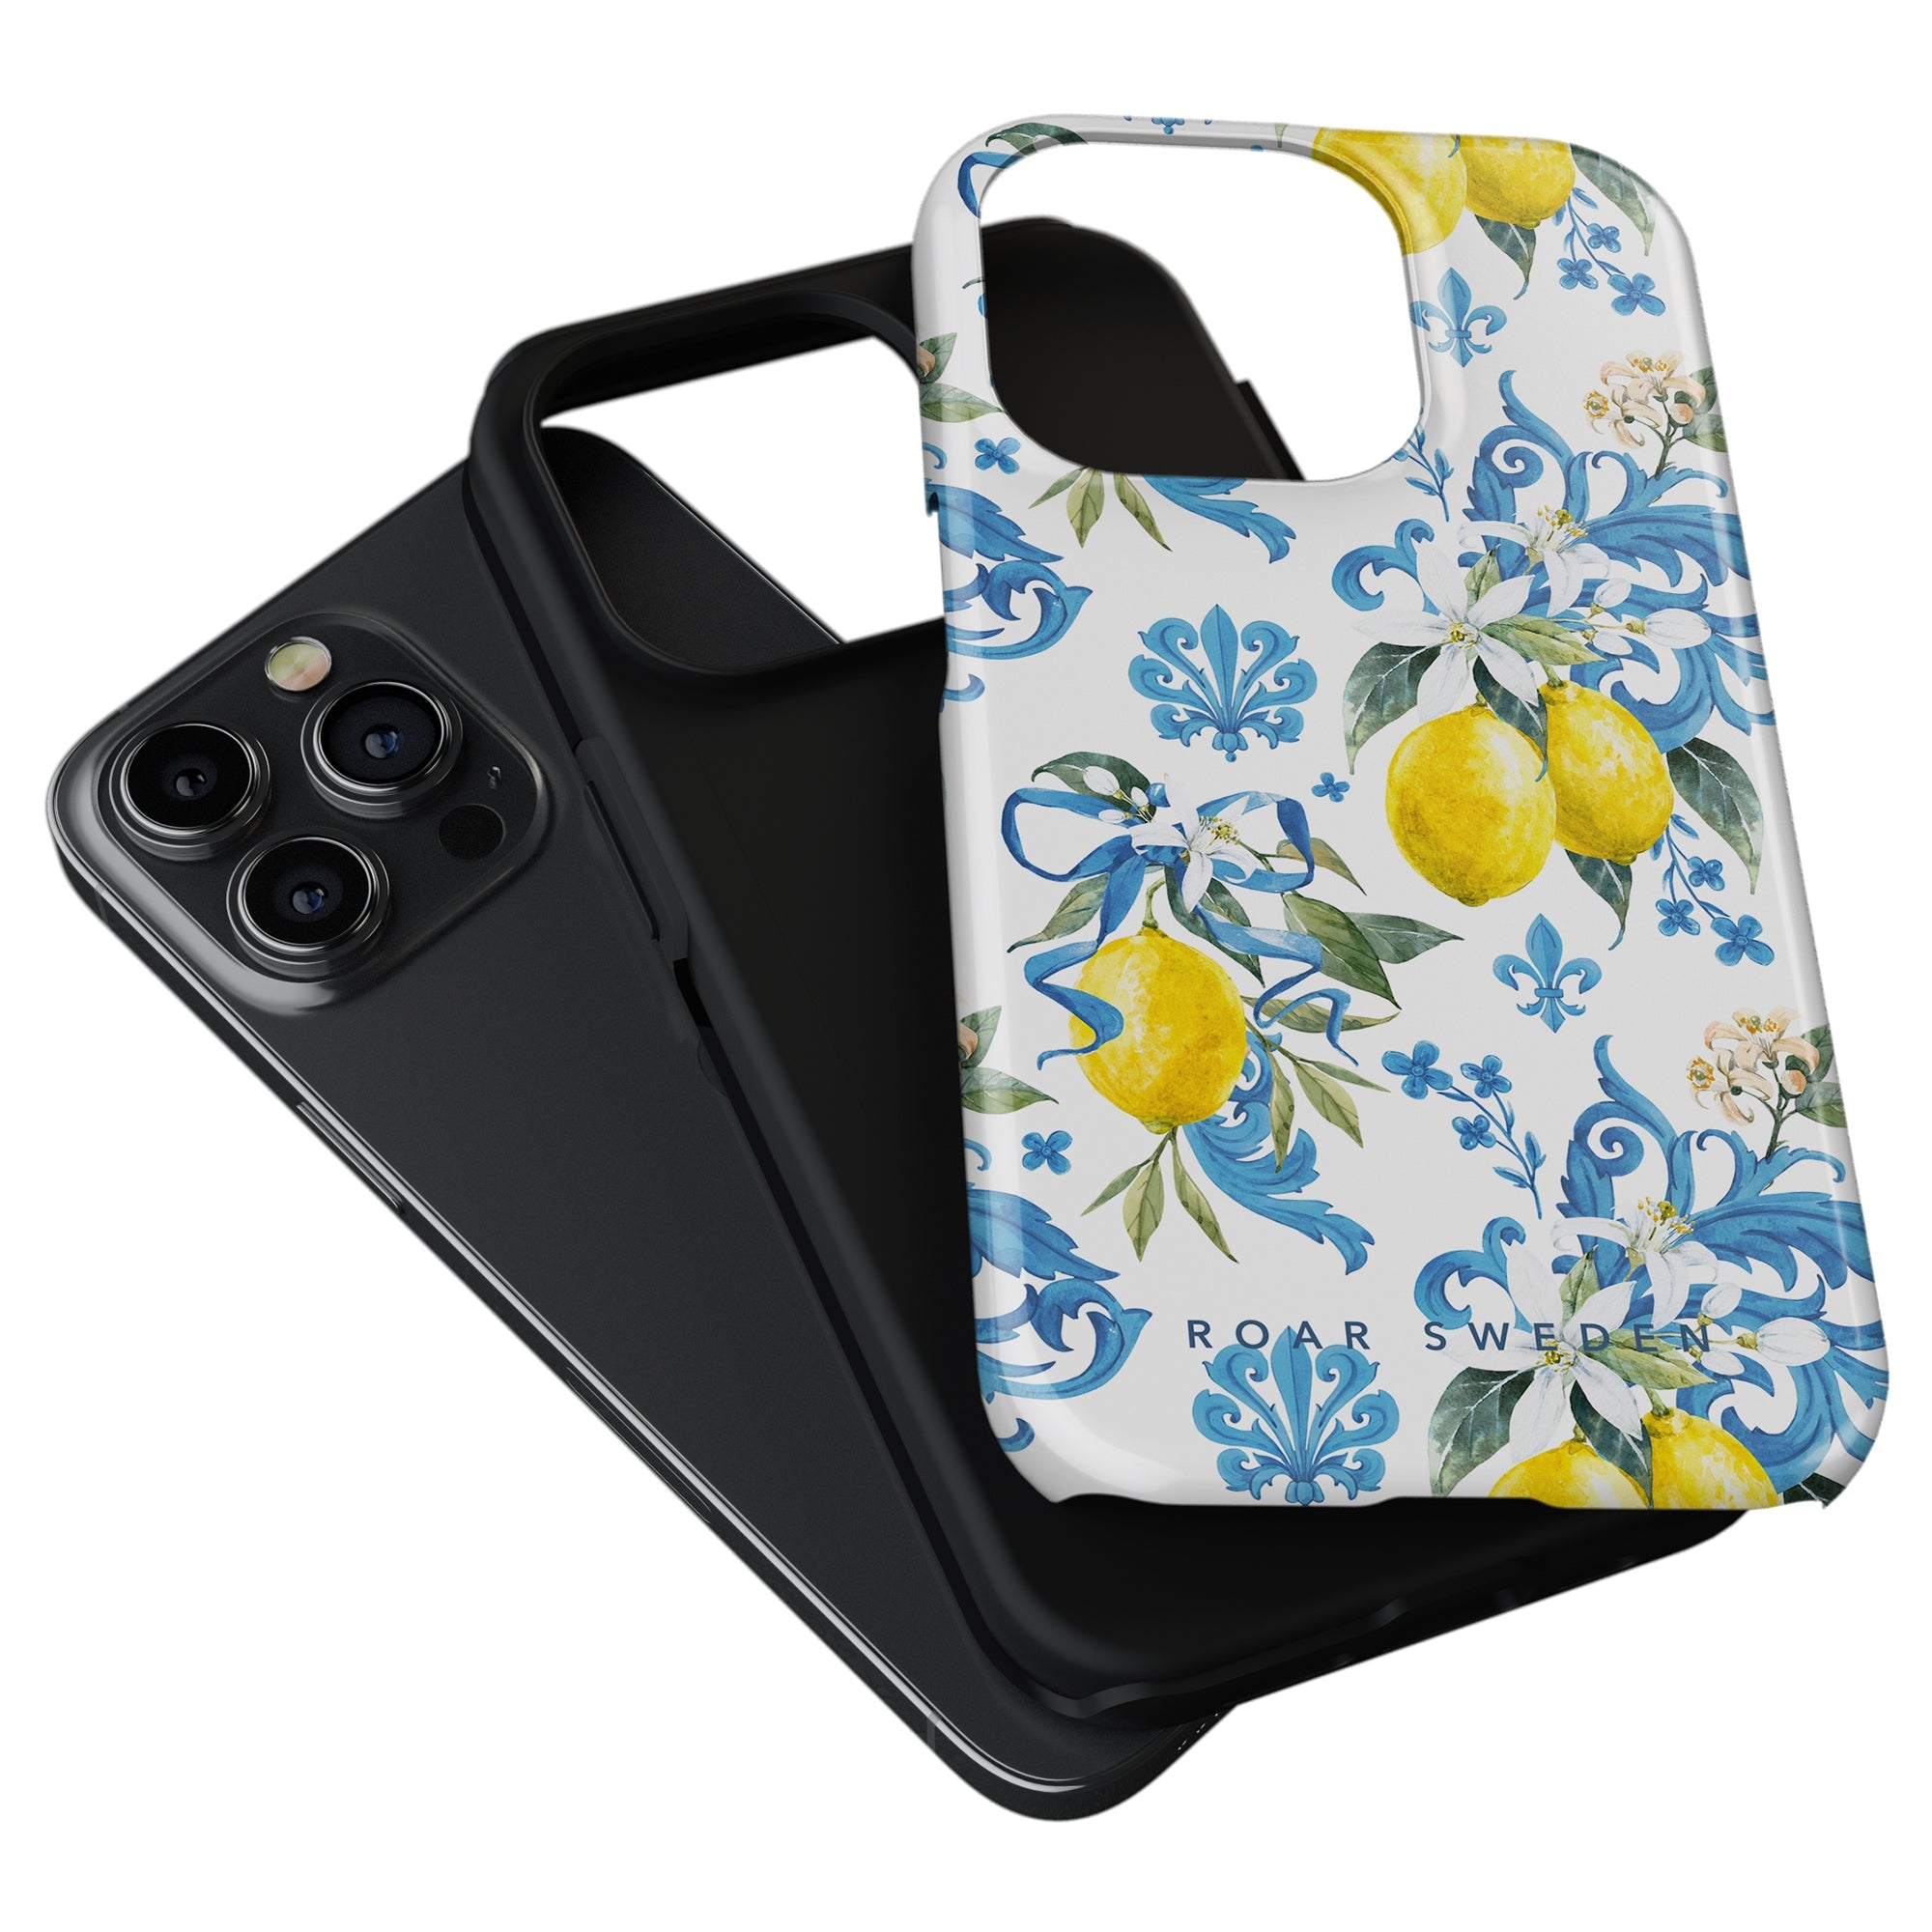 Black smartphone with triple-camera setup next to a Bianca - Tough case with lemon and floral pattern inspired by Sicilian culture.